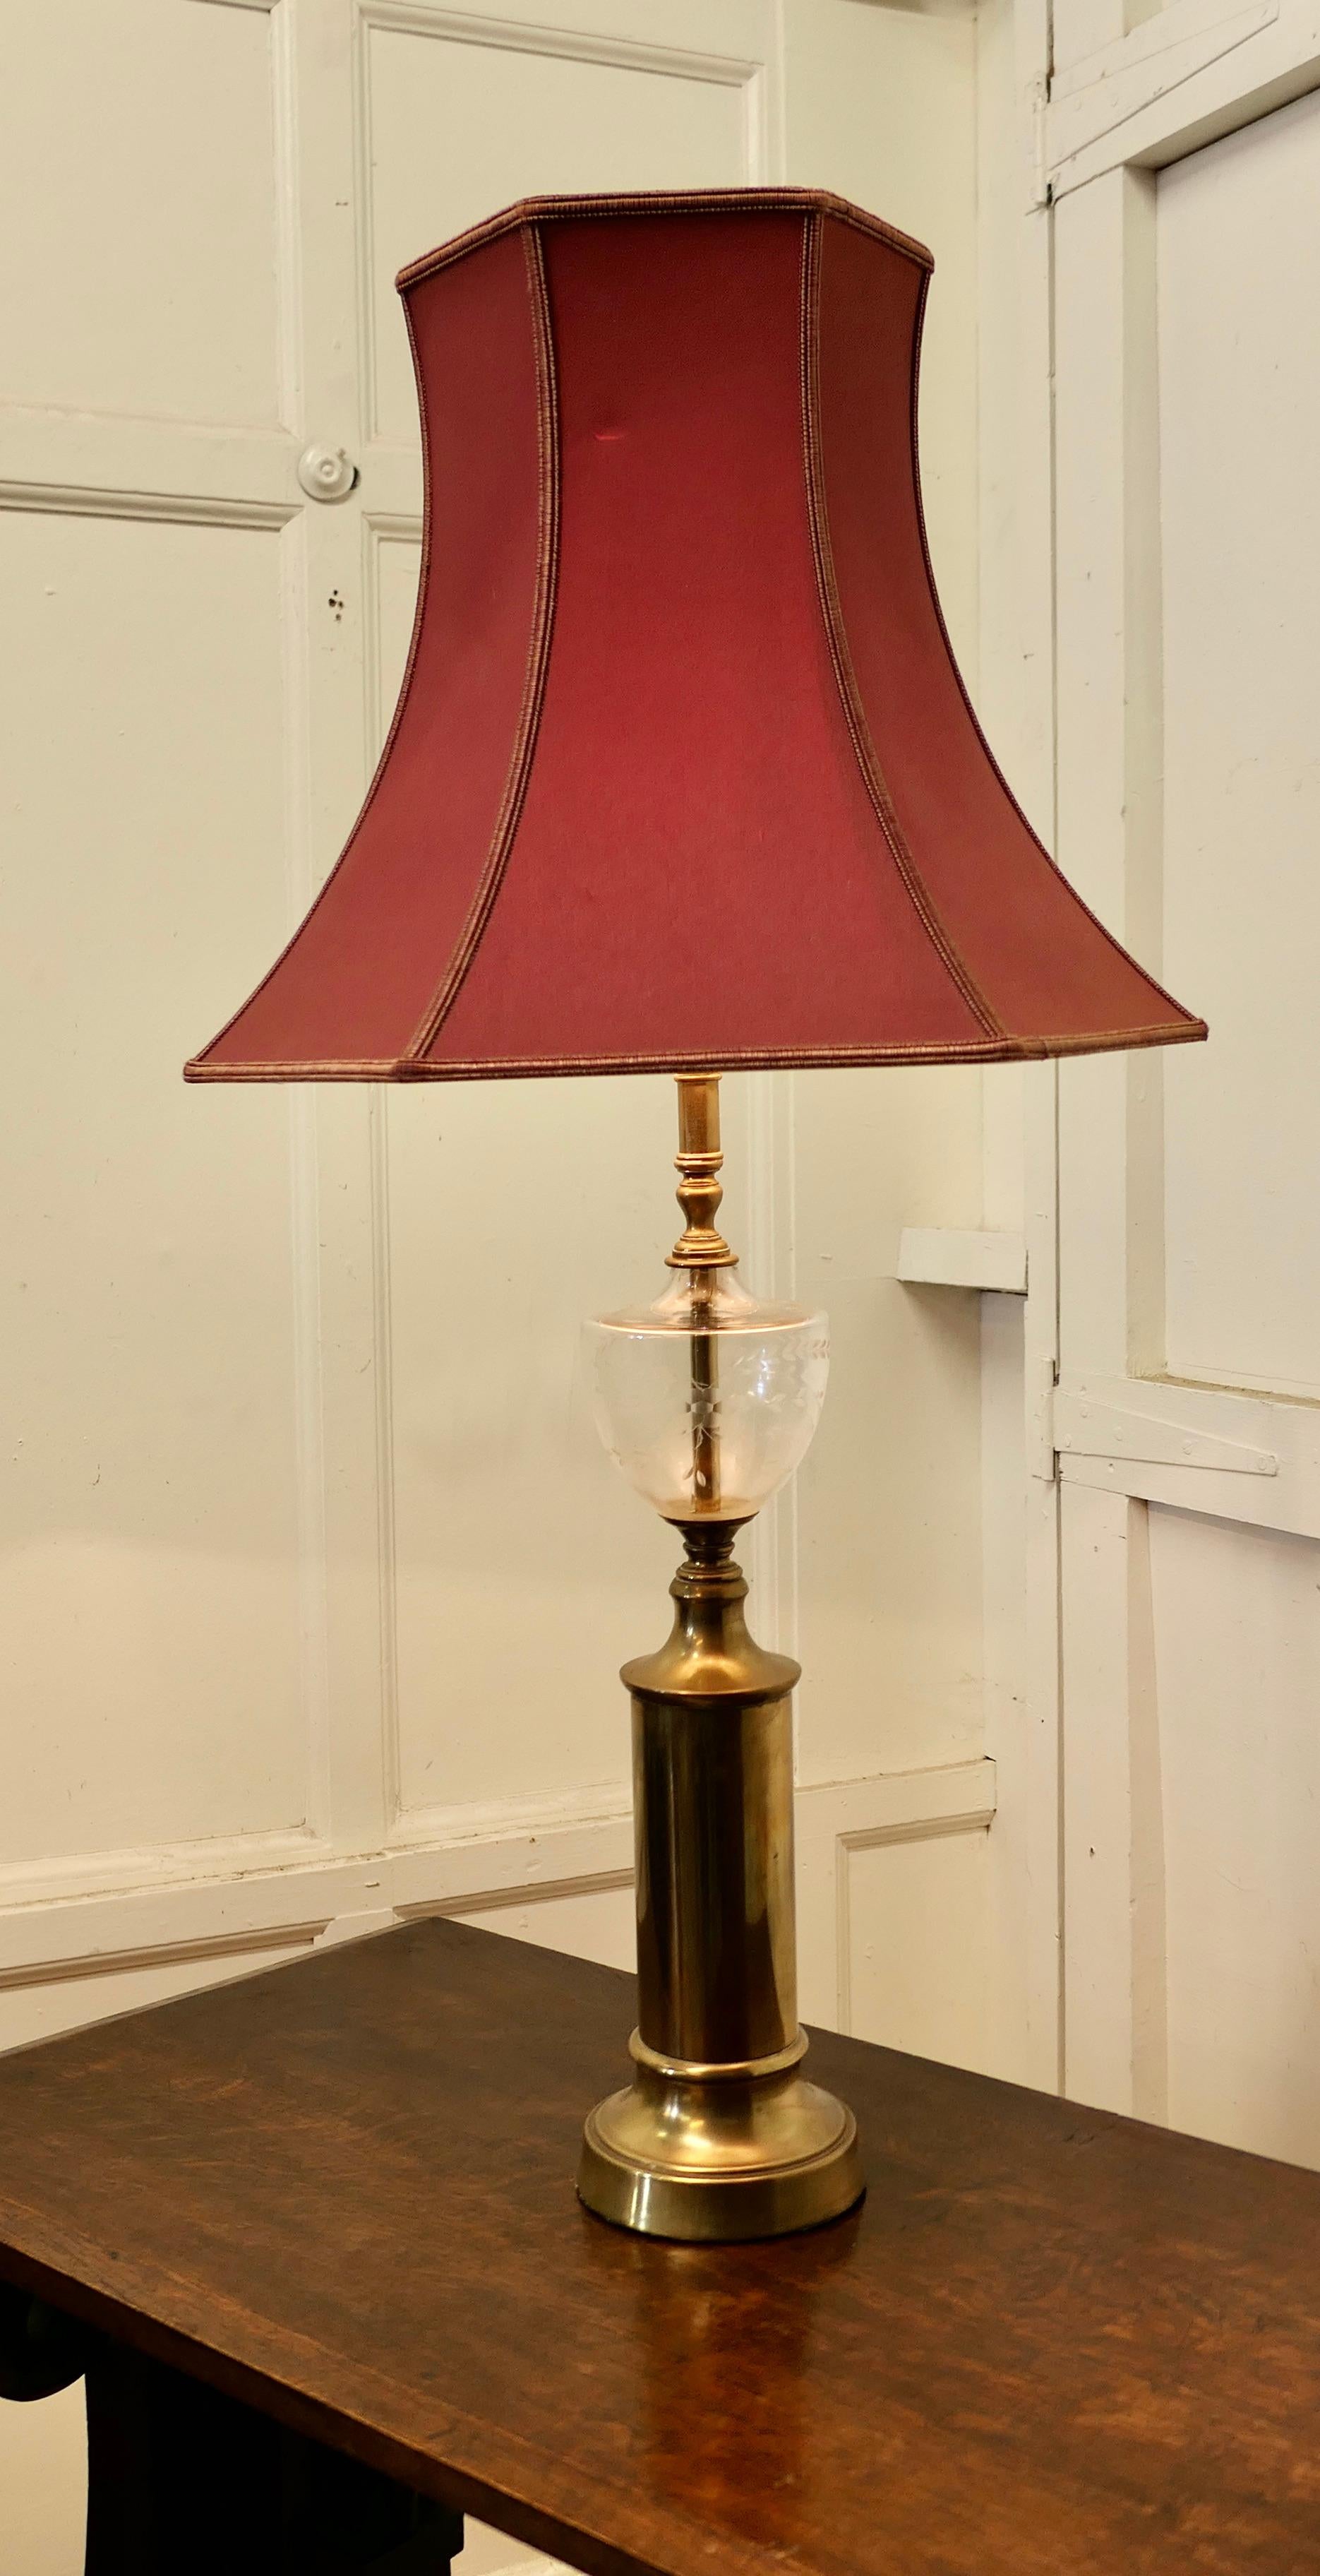 Lovely Glass and Brass Table Lamp 

A beautiful lamp it is designed to look like a Victorian oil lamp with a etched glass reservoir it is set on a tall brass base, and has a large red shade which can be included if wished

The lamp  is in good